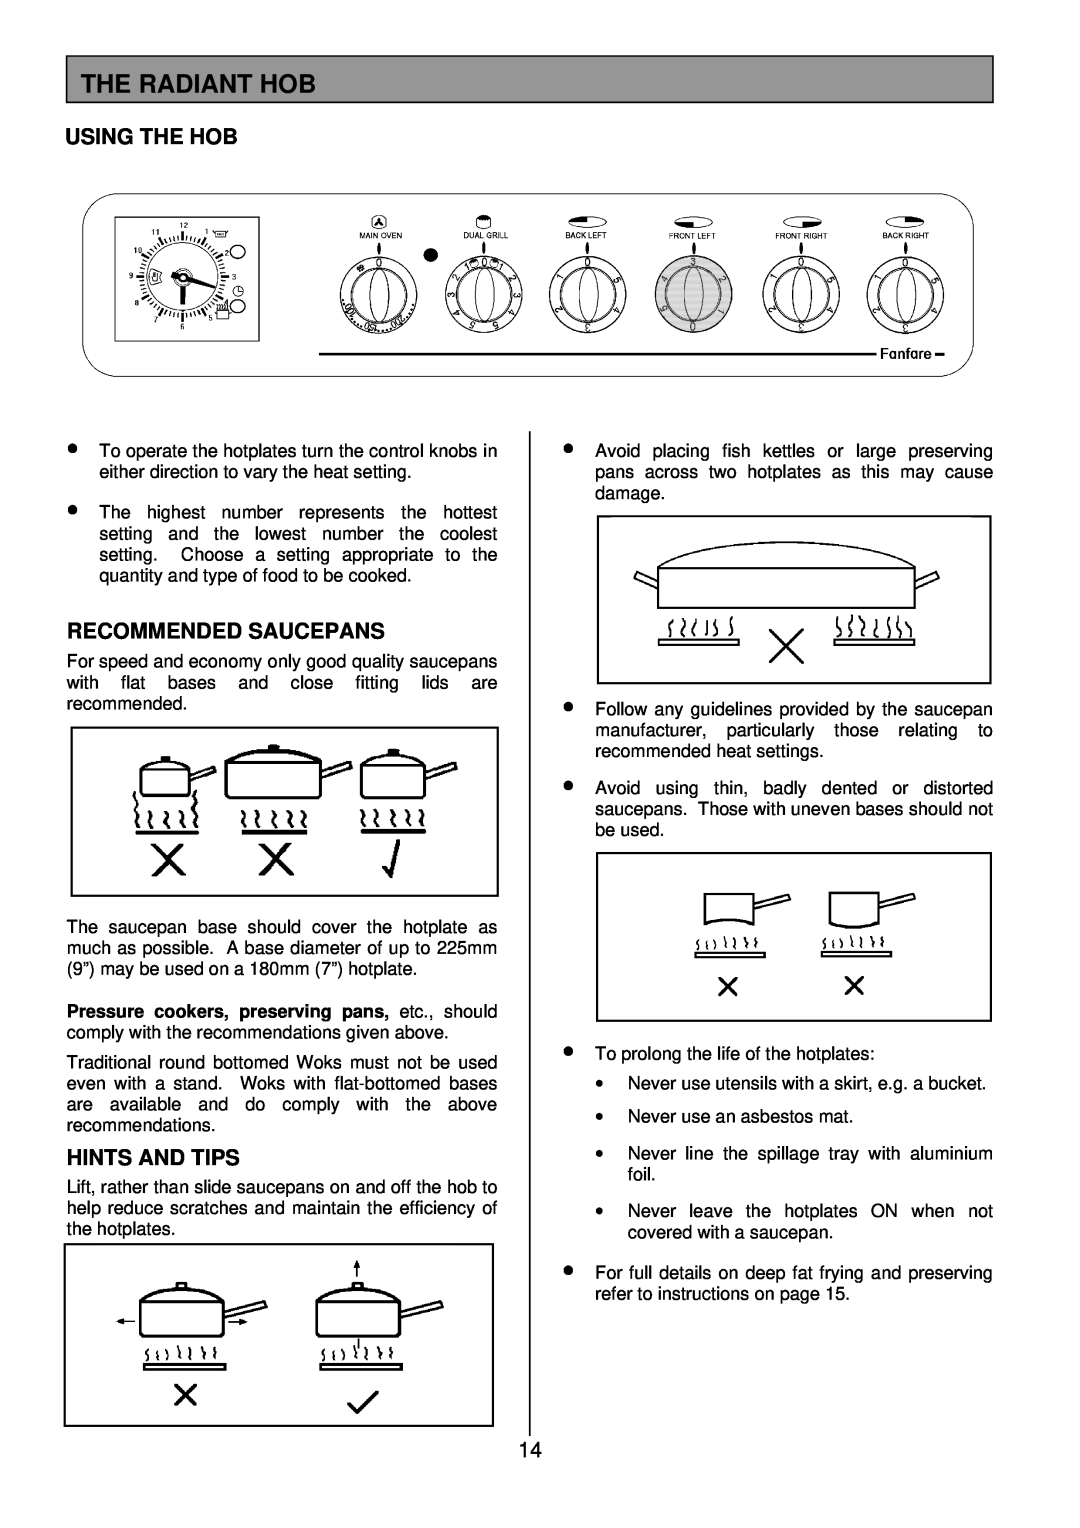 Tricity Bendix SB 422/423 installation instructions The Radiant Hob, Using The Hob, Recommended Saucepans, Hints And Tips 